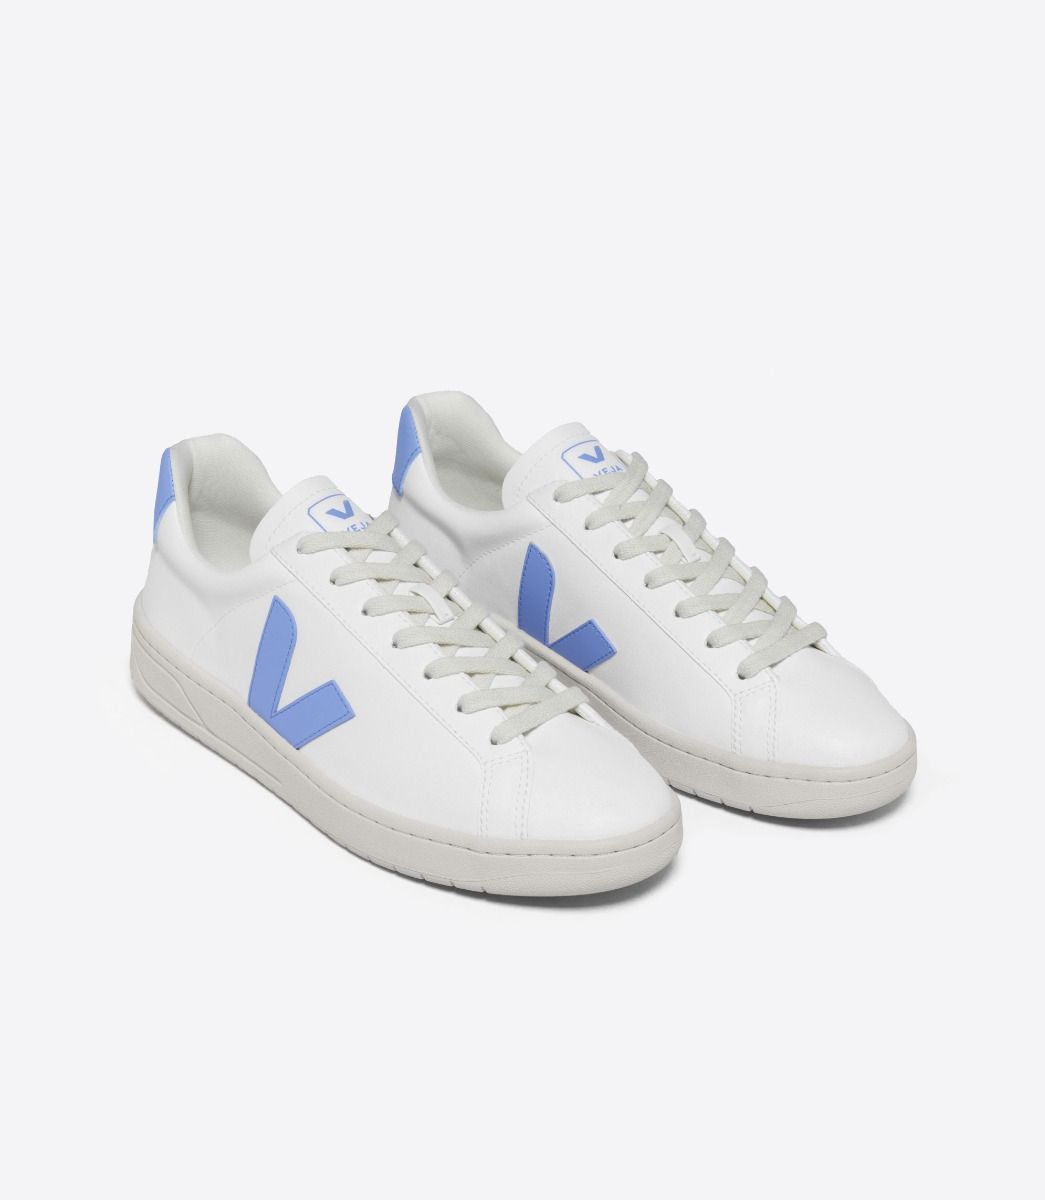 VEJA sneakers are produced in high-standard factories in Brazil. The logistics of VEJA stores in Europe and e-commerce are managed by Log’ins, a professional and social inclusion company.